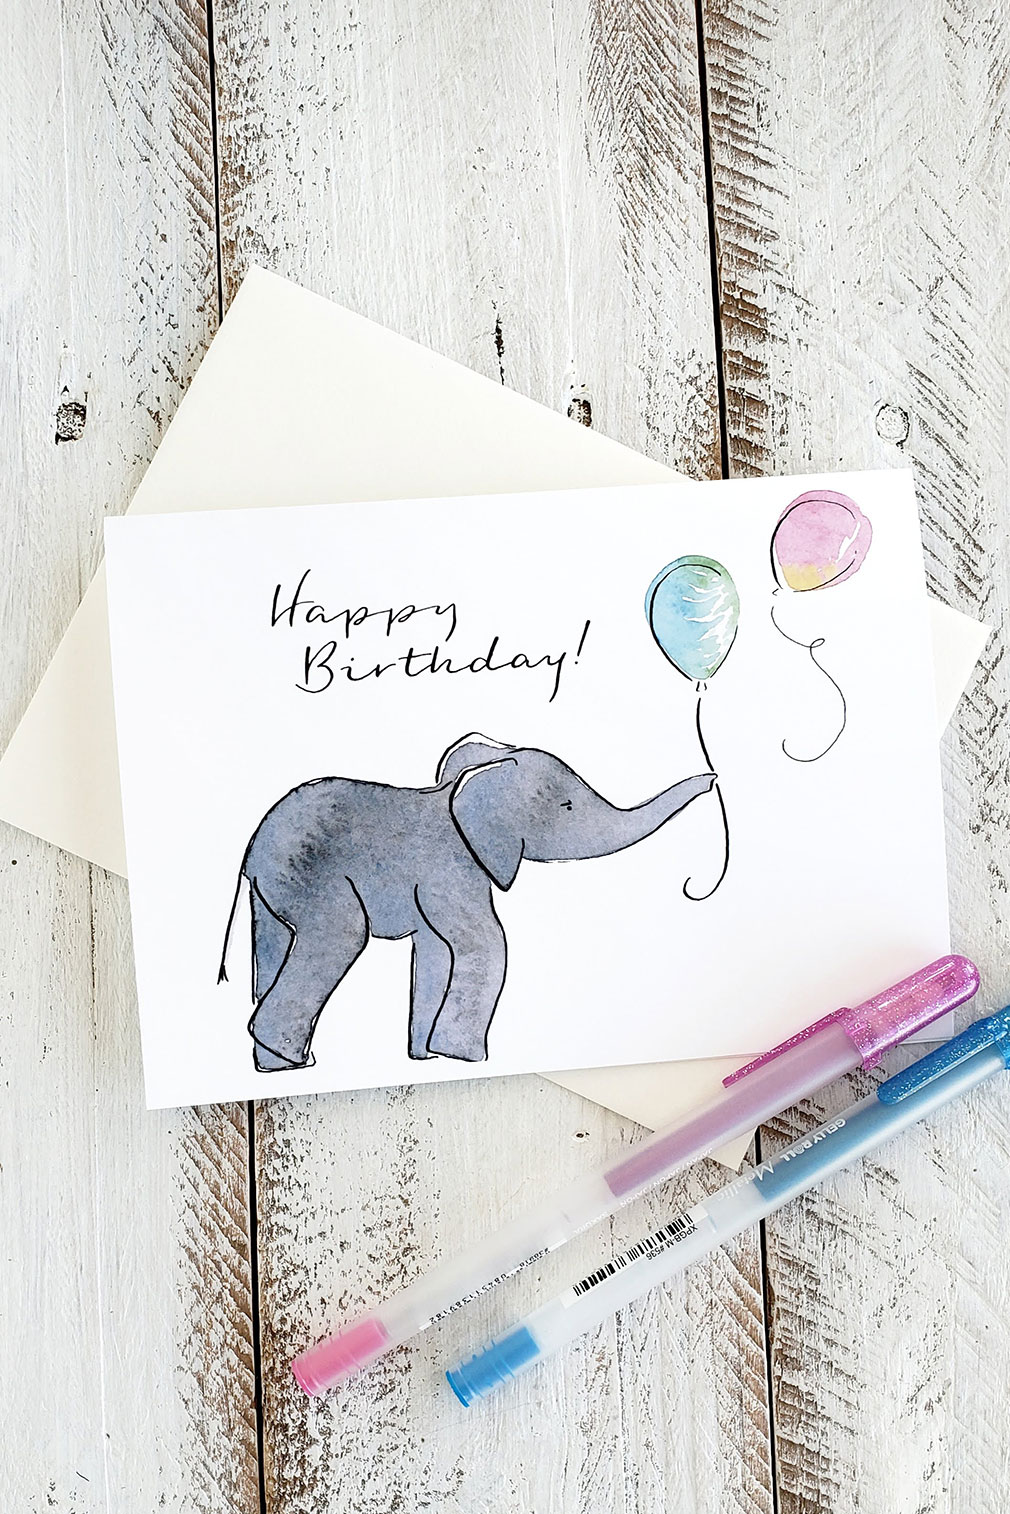 Watercolor Baby Elephant Birthday Greeting Card - The Painted Pen The Painted Pen